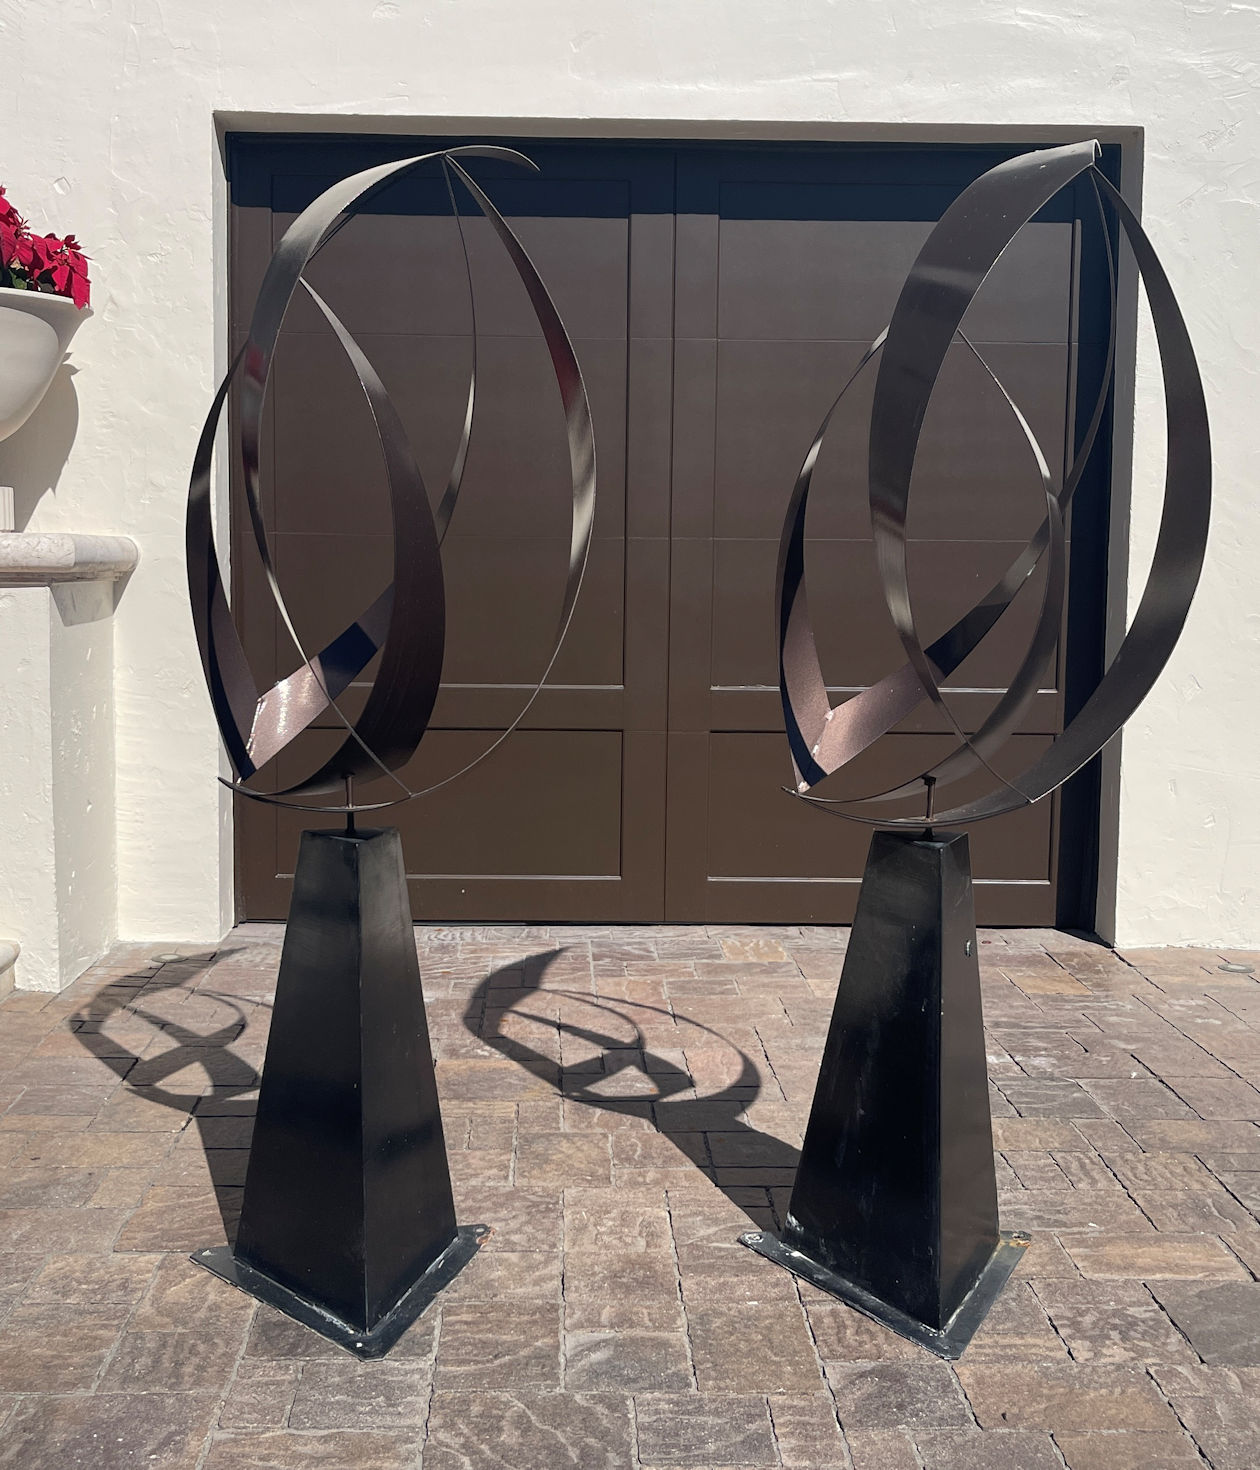 TWO LARGE MODERN WELDED METAL ABSTRACT 36977e